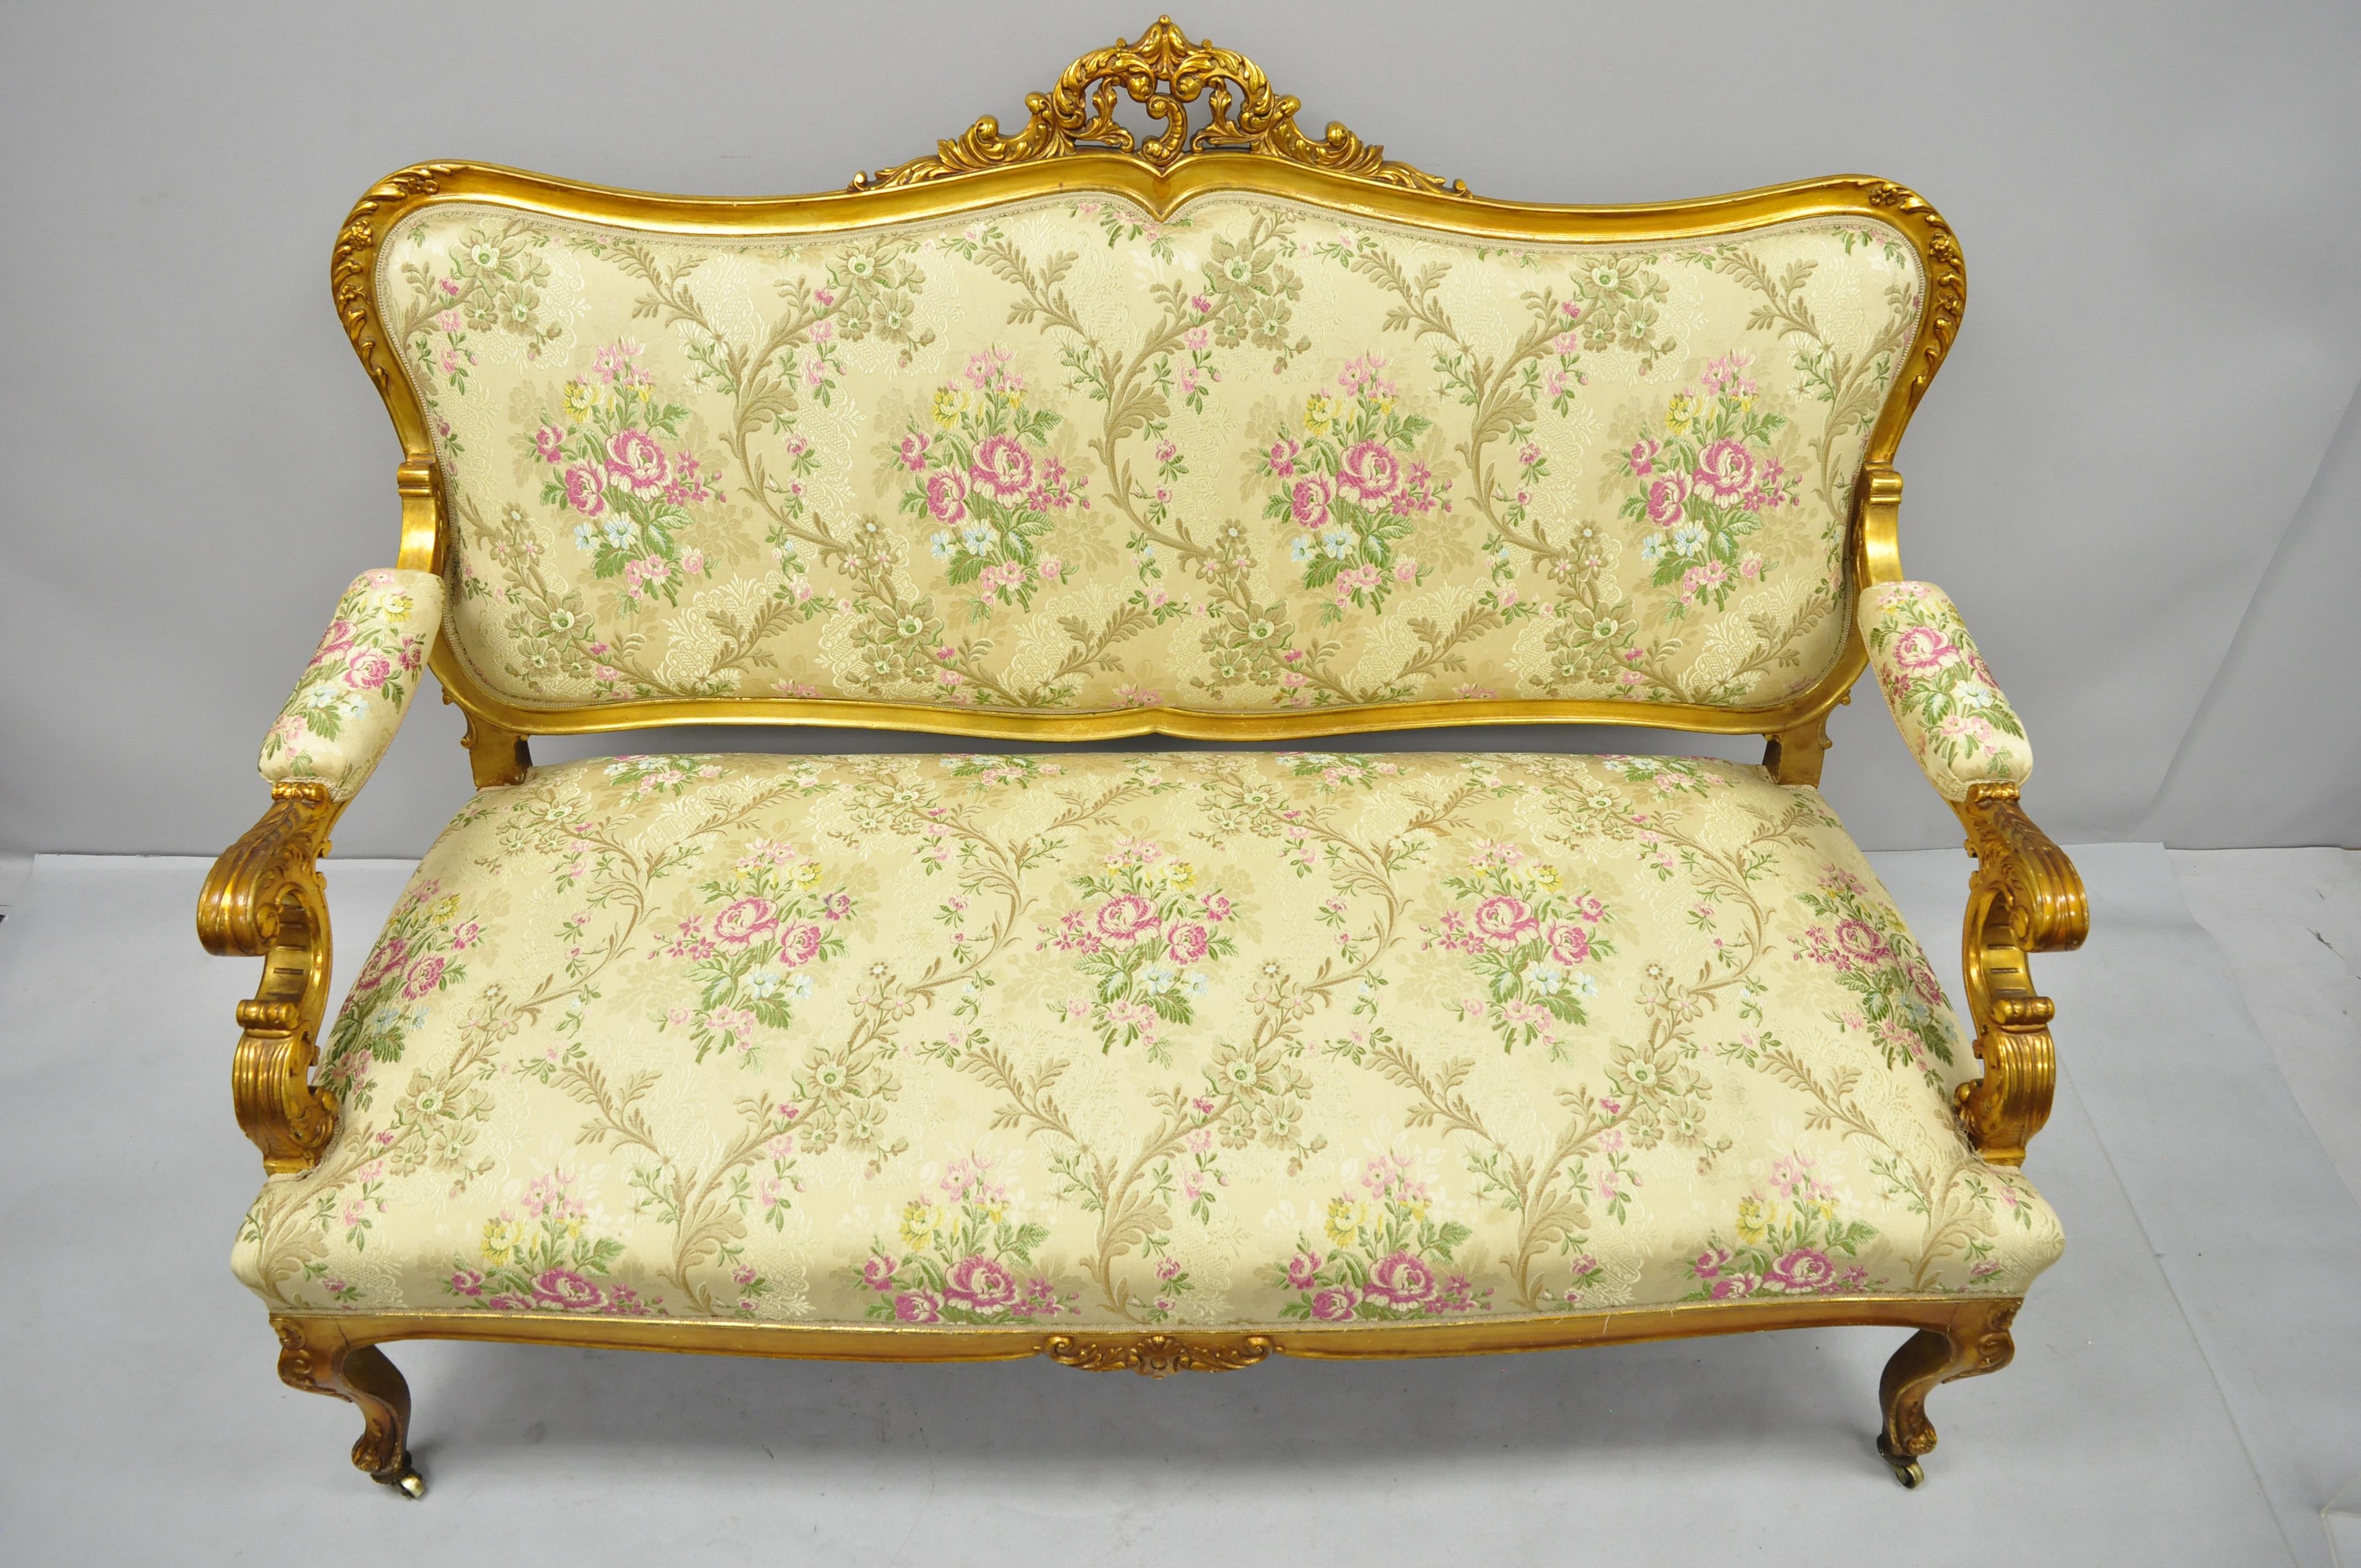 1920s, French, Louis XV style gold gilt settee. Item features rolling casters, floral patterned upholstery, solid wood construction, upholstered armrests, distressed gold finish, nicely carved details and cabriole legs; a very nice antique item.